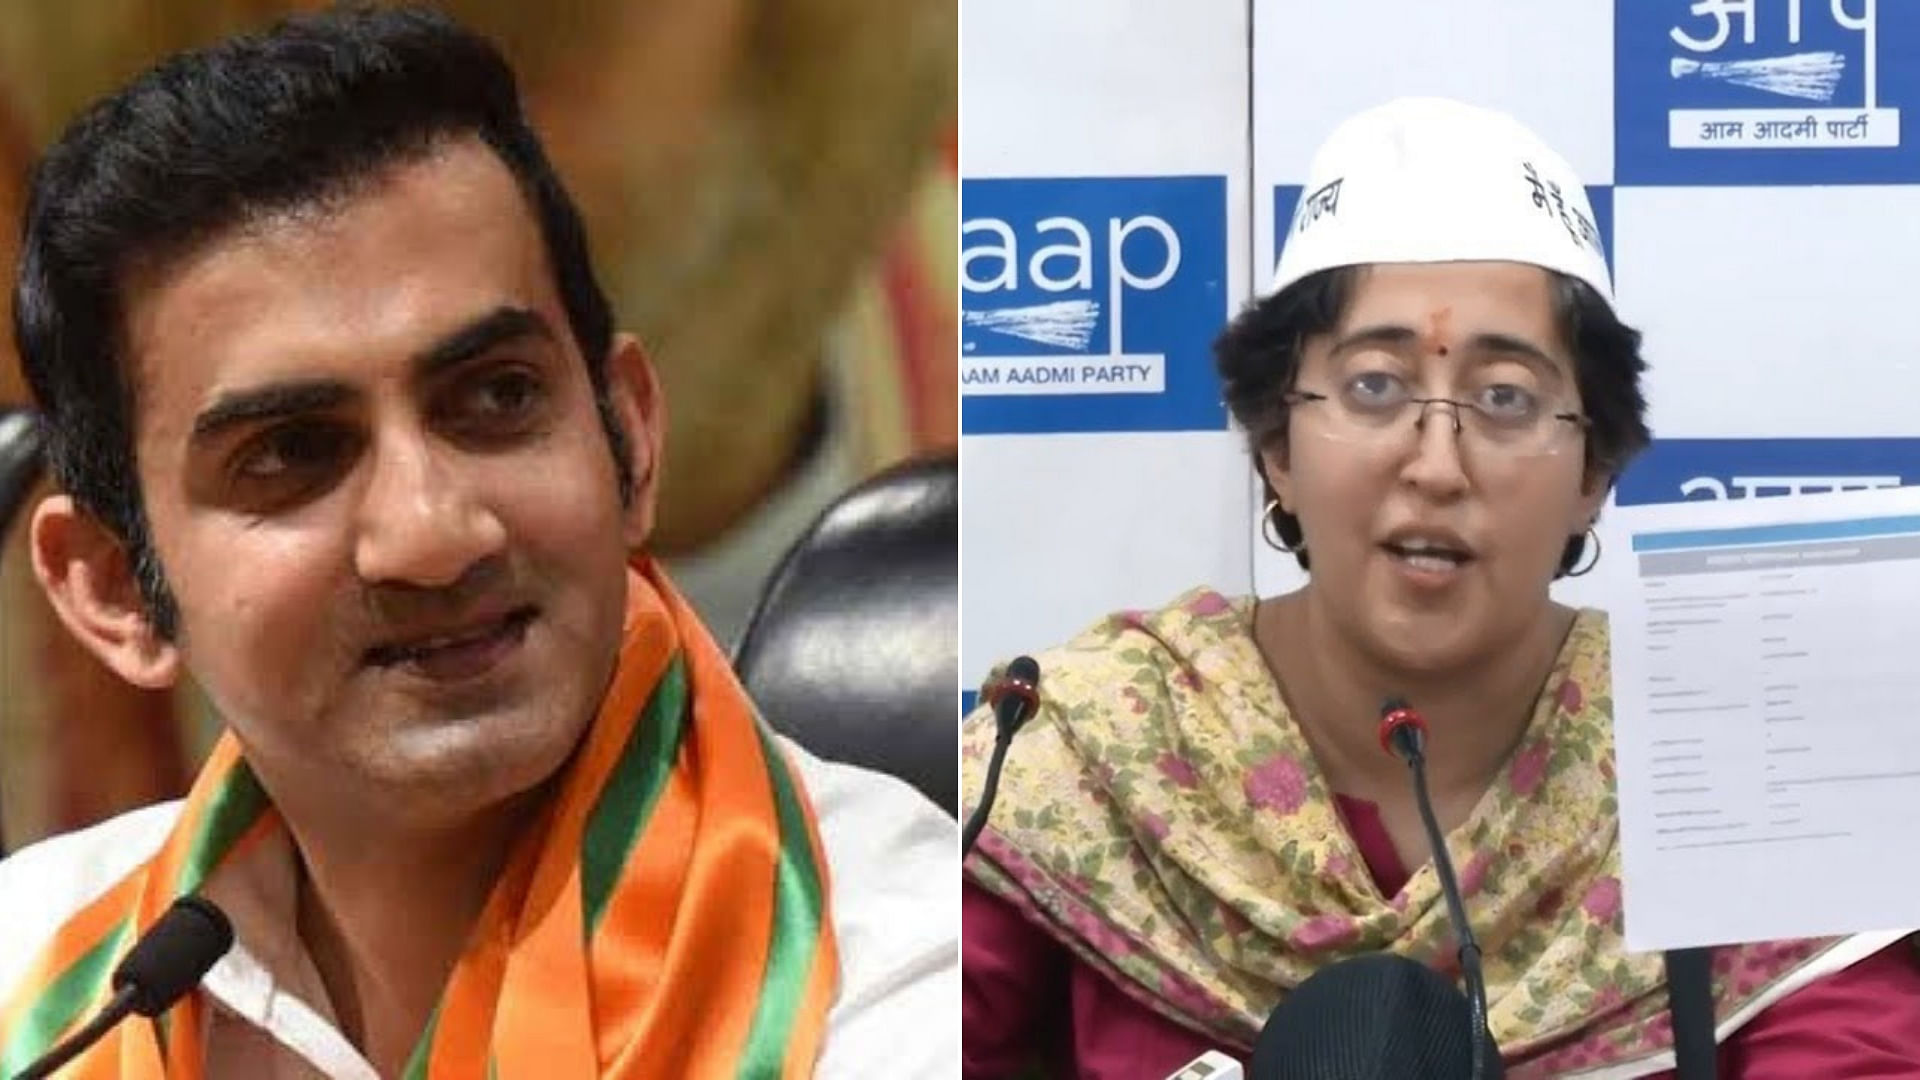 Atishi had filed a criminal complaint against Gambhir on Thursday, alleging that he possessed voter IDs from two constituencies, Karol Bagh and Rajinder Nagar.